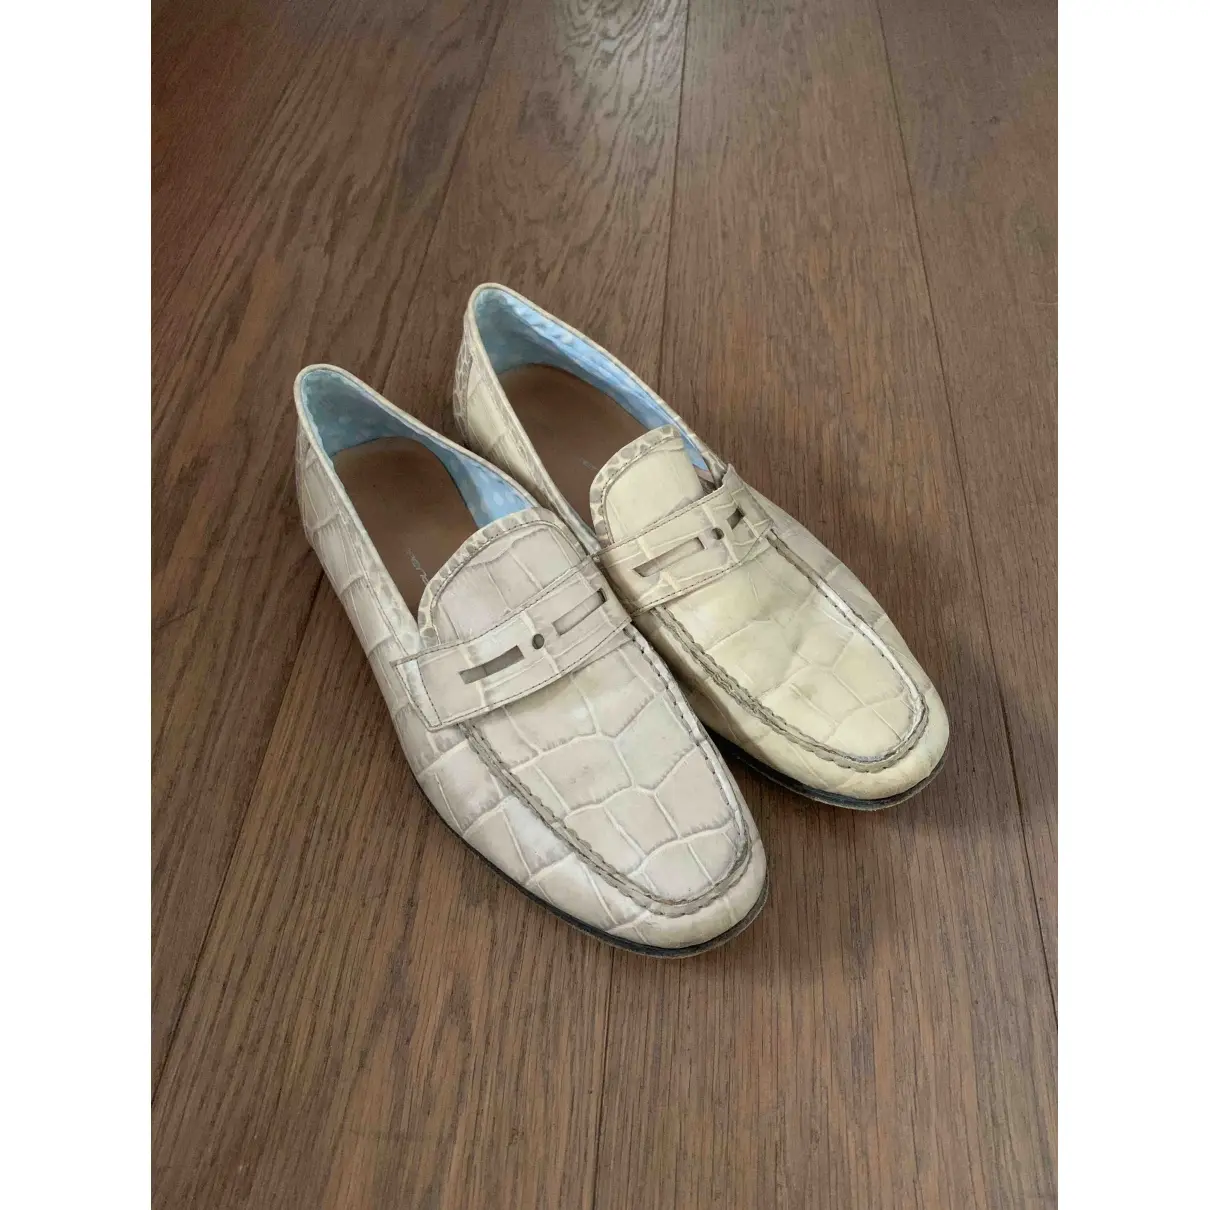 Italia Independent Leather flats for sale